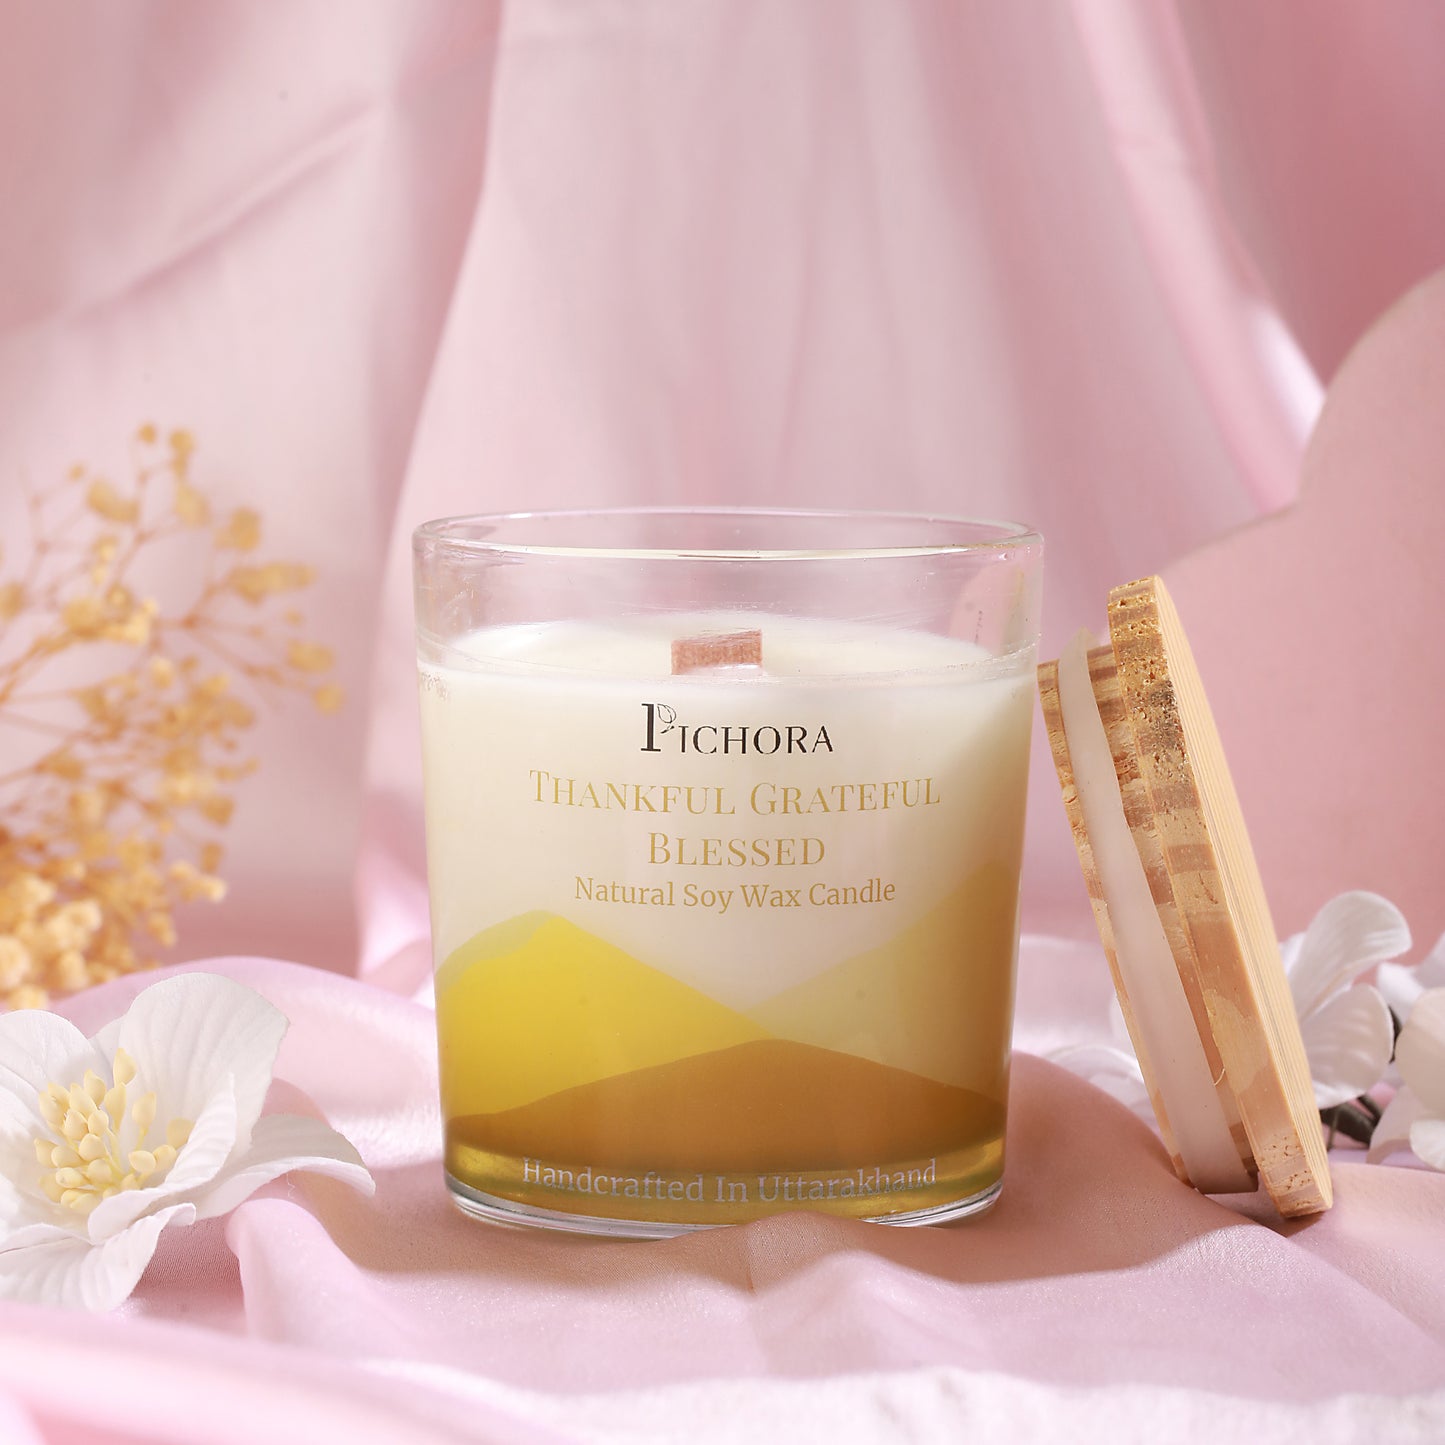 Thankful Grateful Blessed - Soy Wax Candle